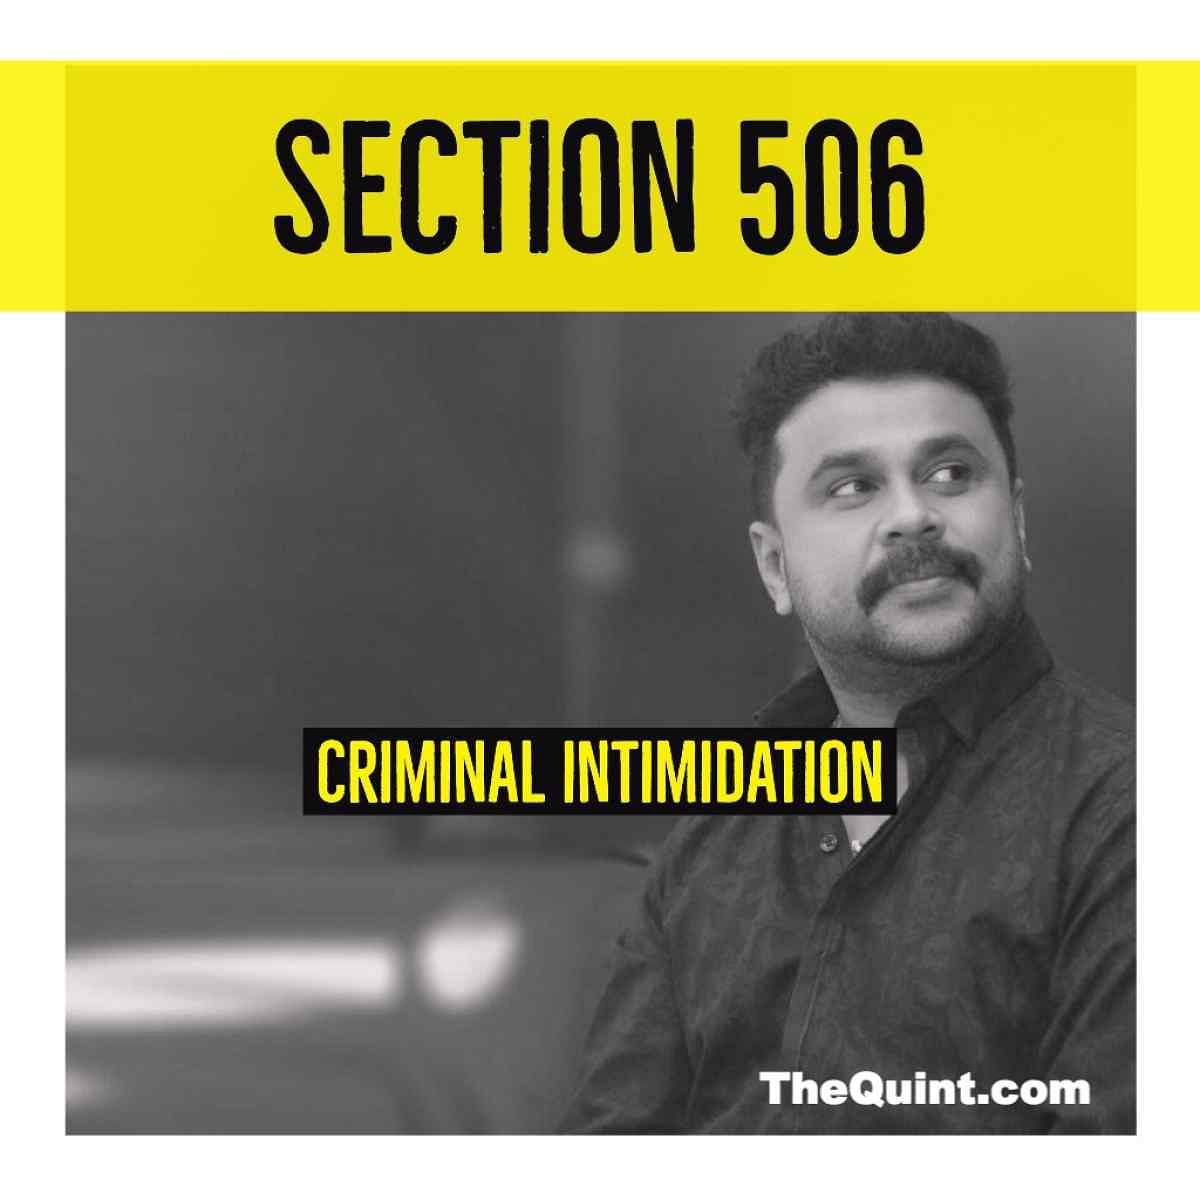 Actor Dileep is accused of plotting the abduction, sexual assault, intimidation of a prominent actress in 2017.